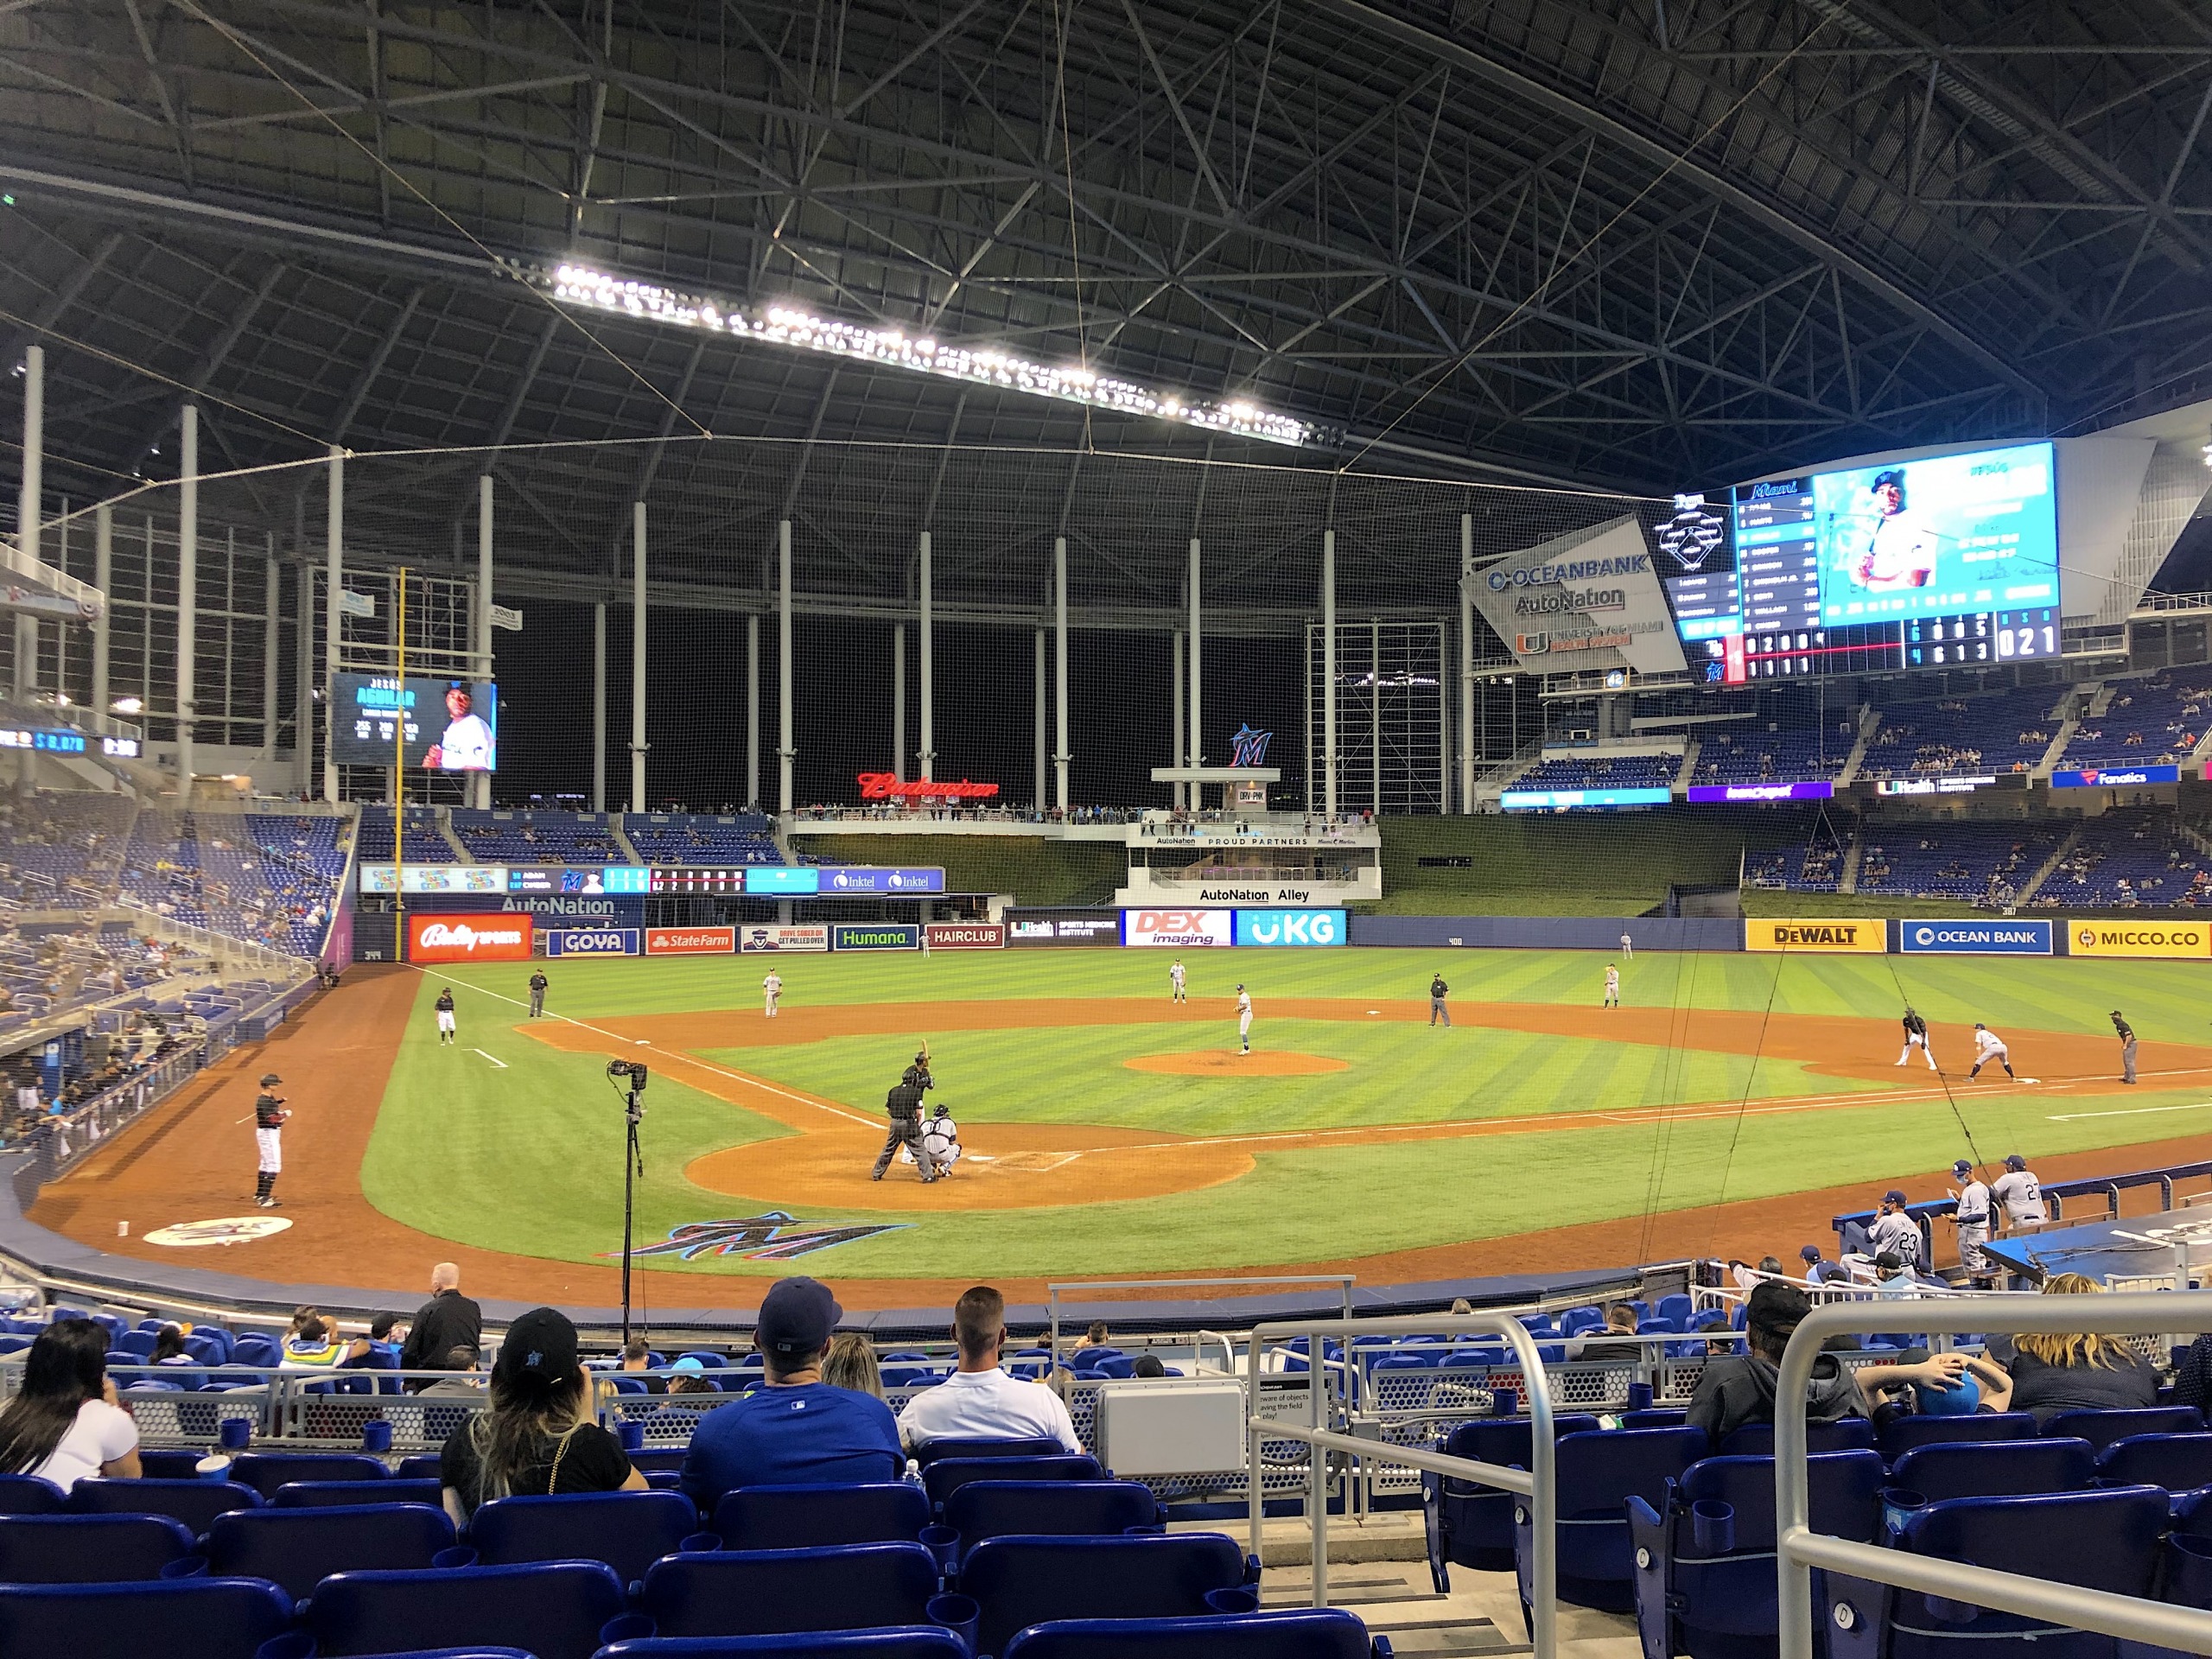 Baseball is back, and Miami Marlins fans are happy to be back, too